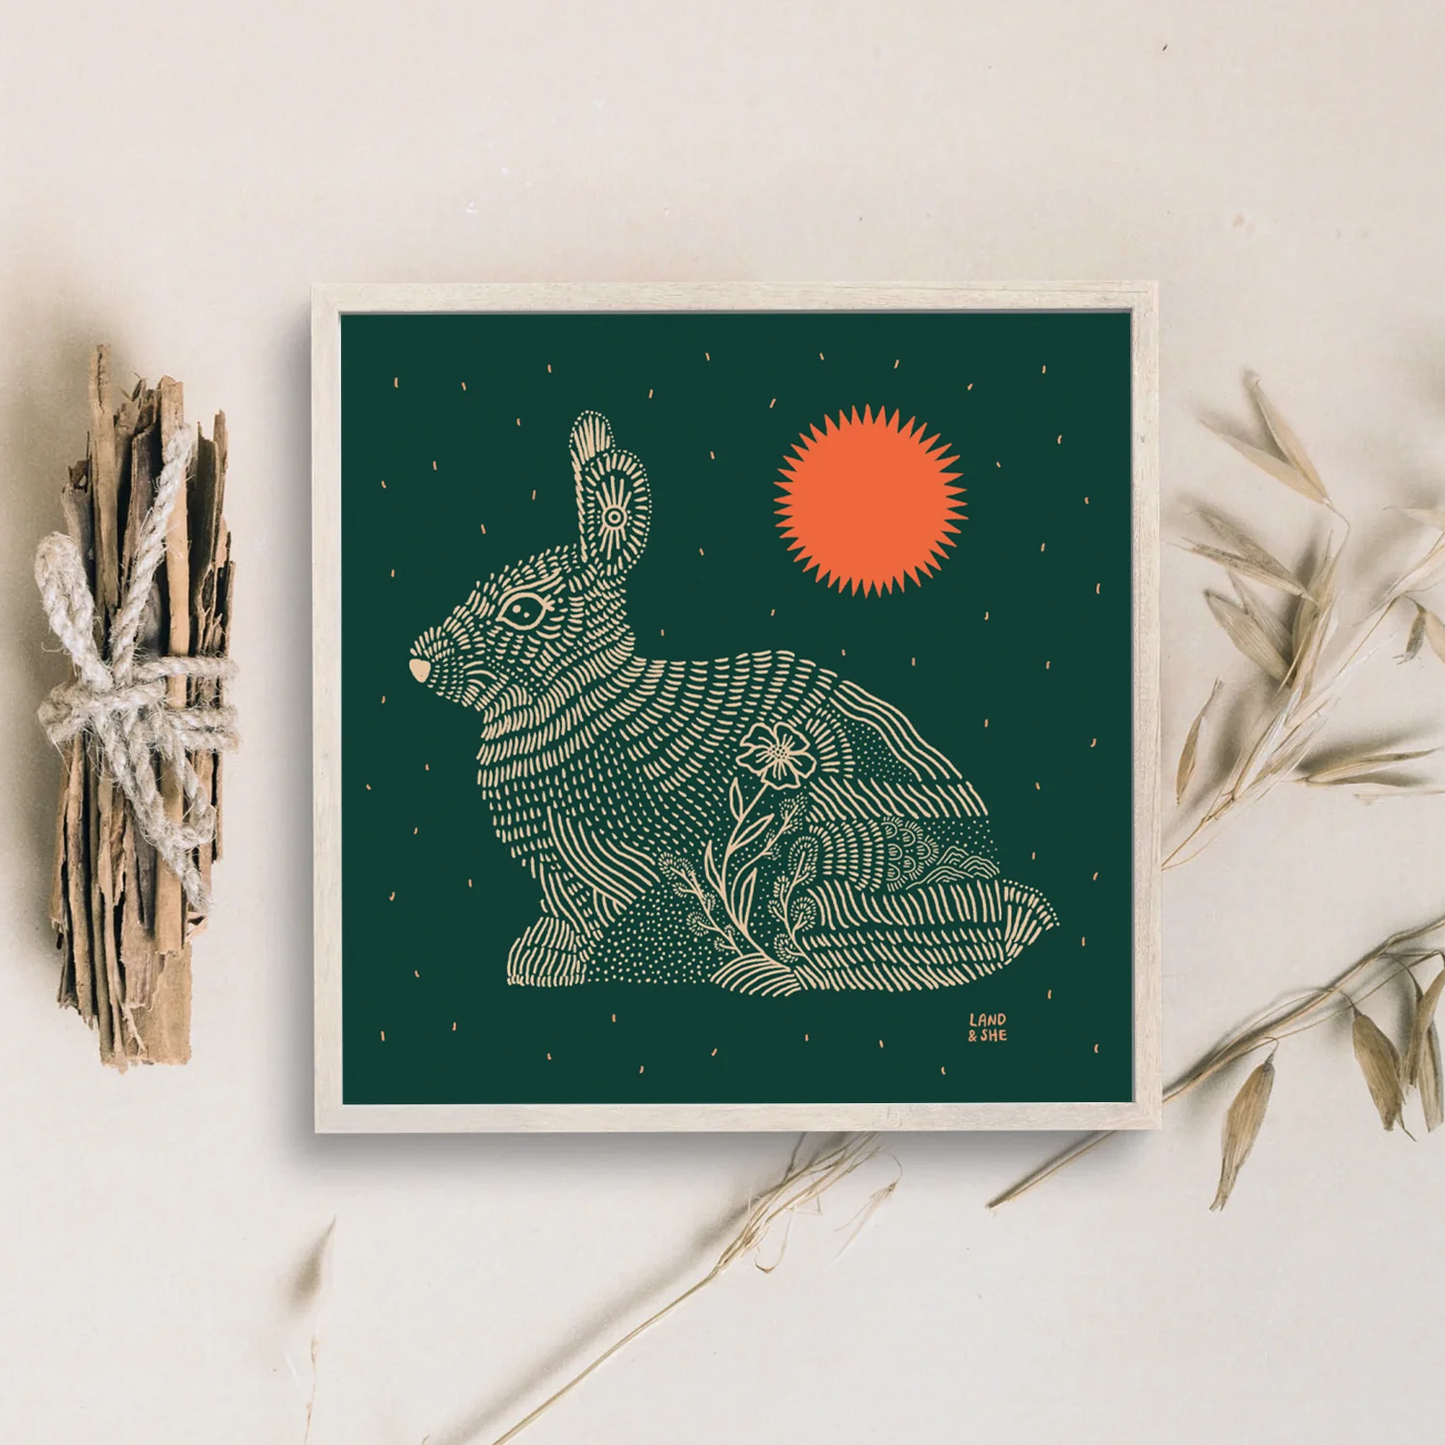 8" x 8" Ode to the Rabbit Print